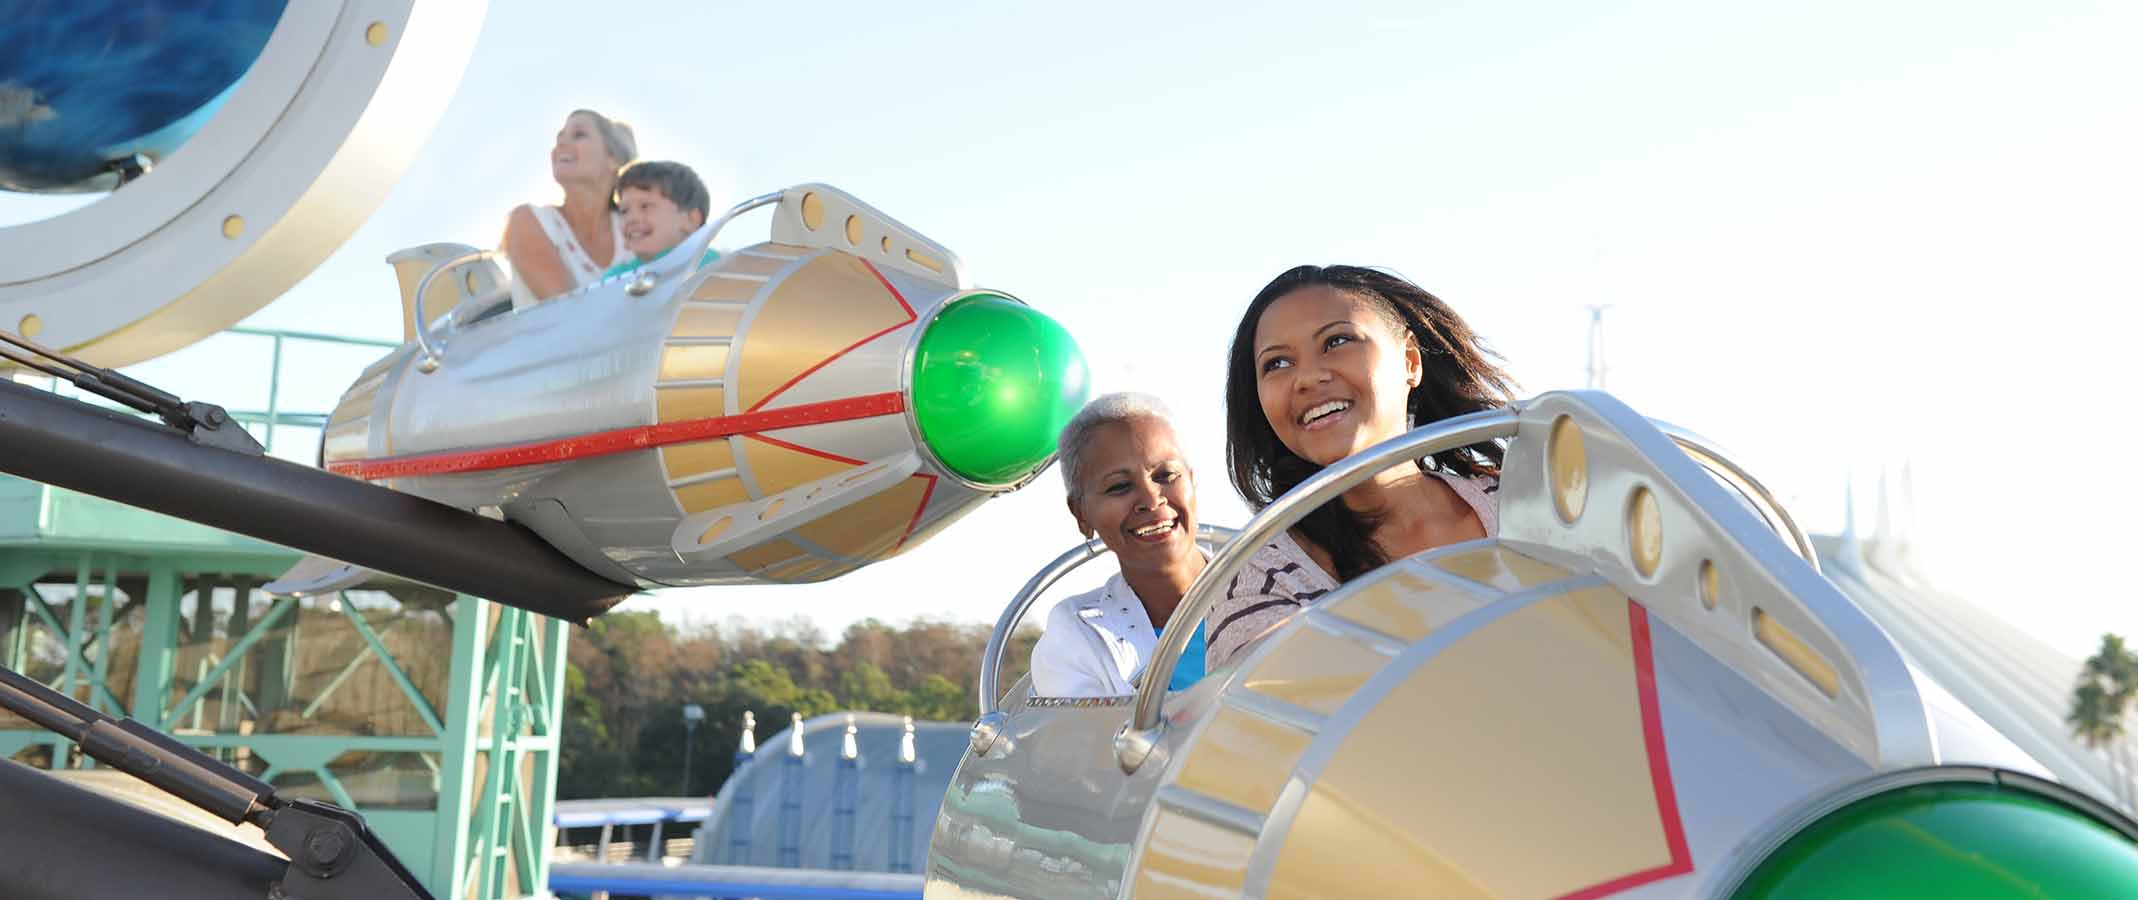 Mother and daughter riding the Astro Orbiter at Disney's Magic Kingdom